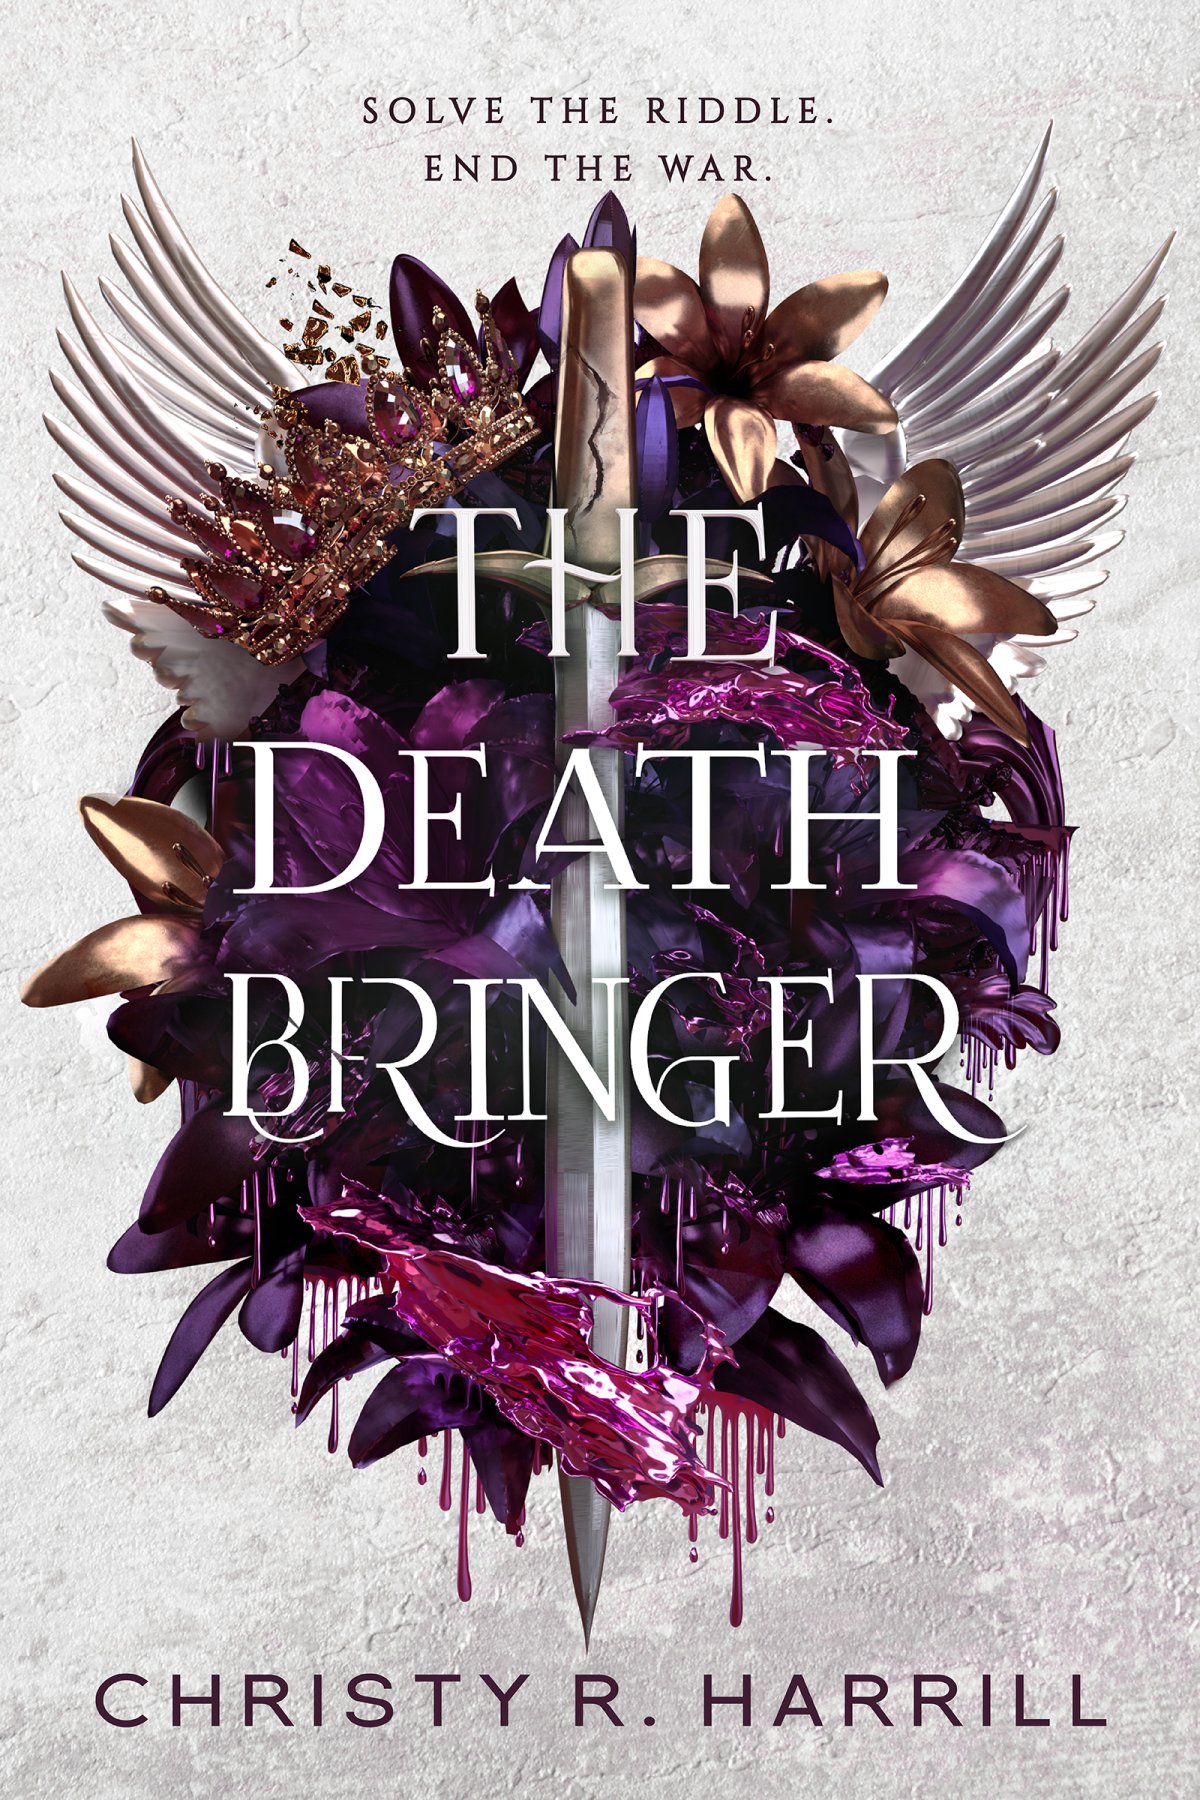 A book cover that reads "The Death Bringer" and features purple and gold art with wings and a sword.